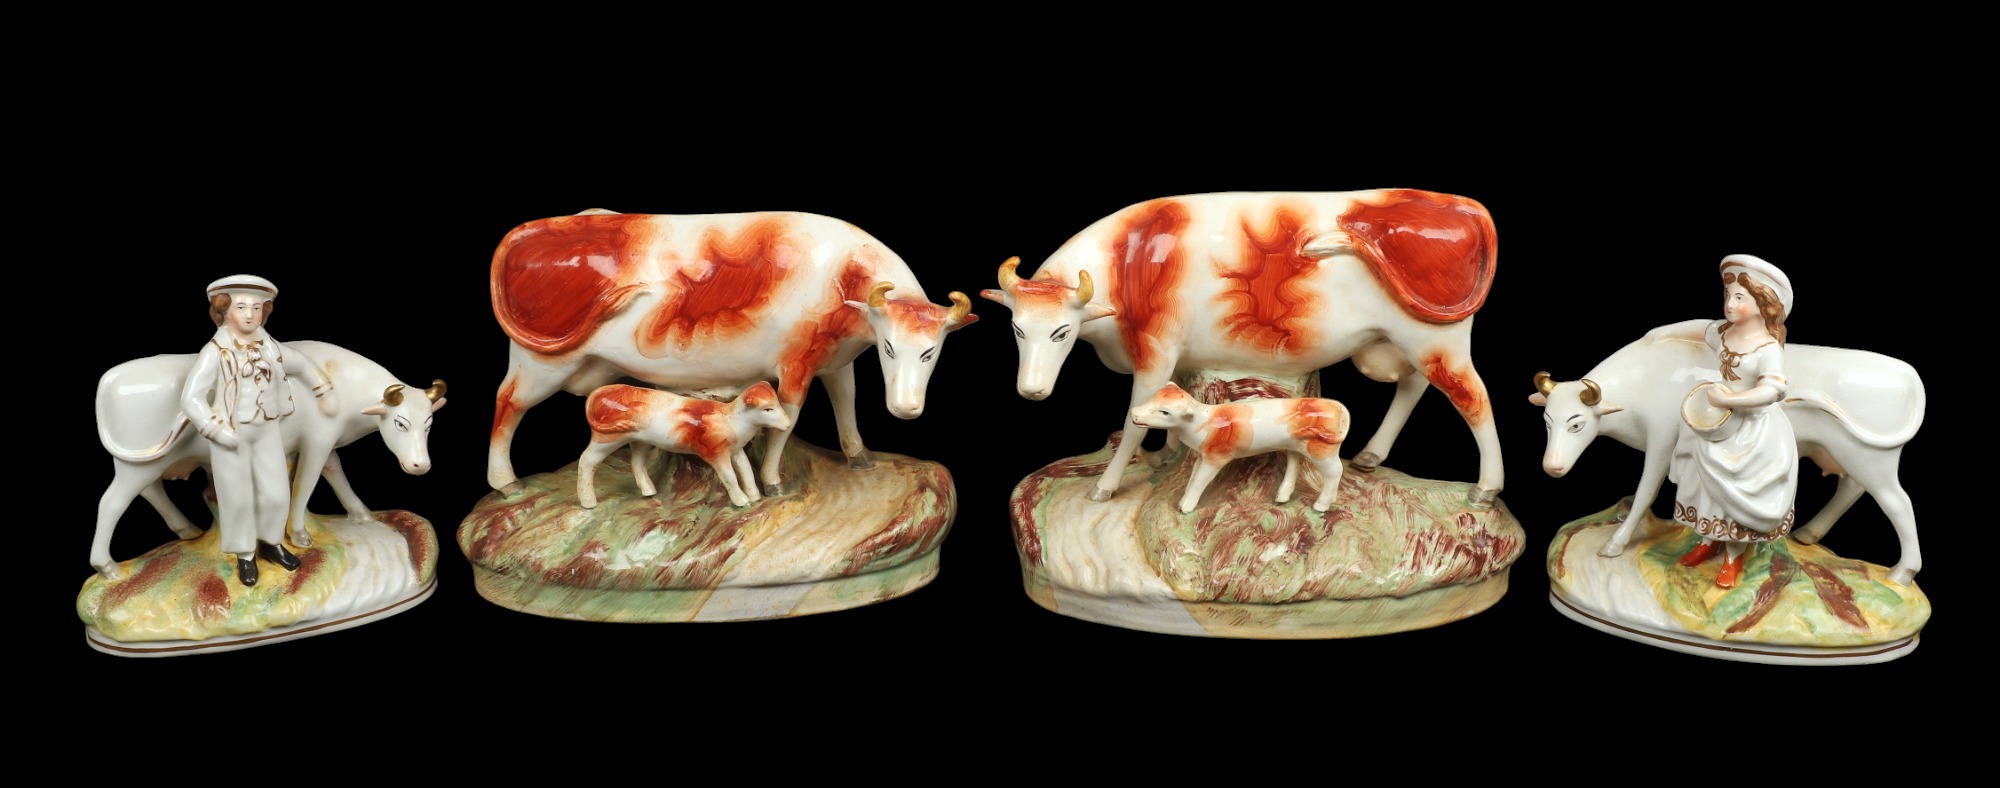 Staffordshire cow and calf figure 3ca479